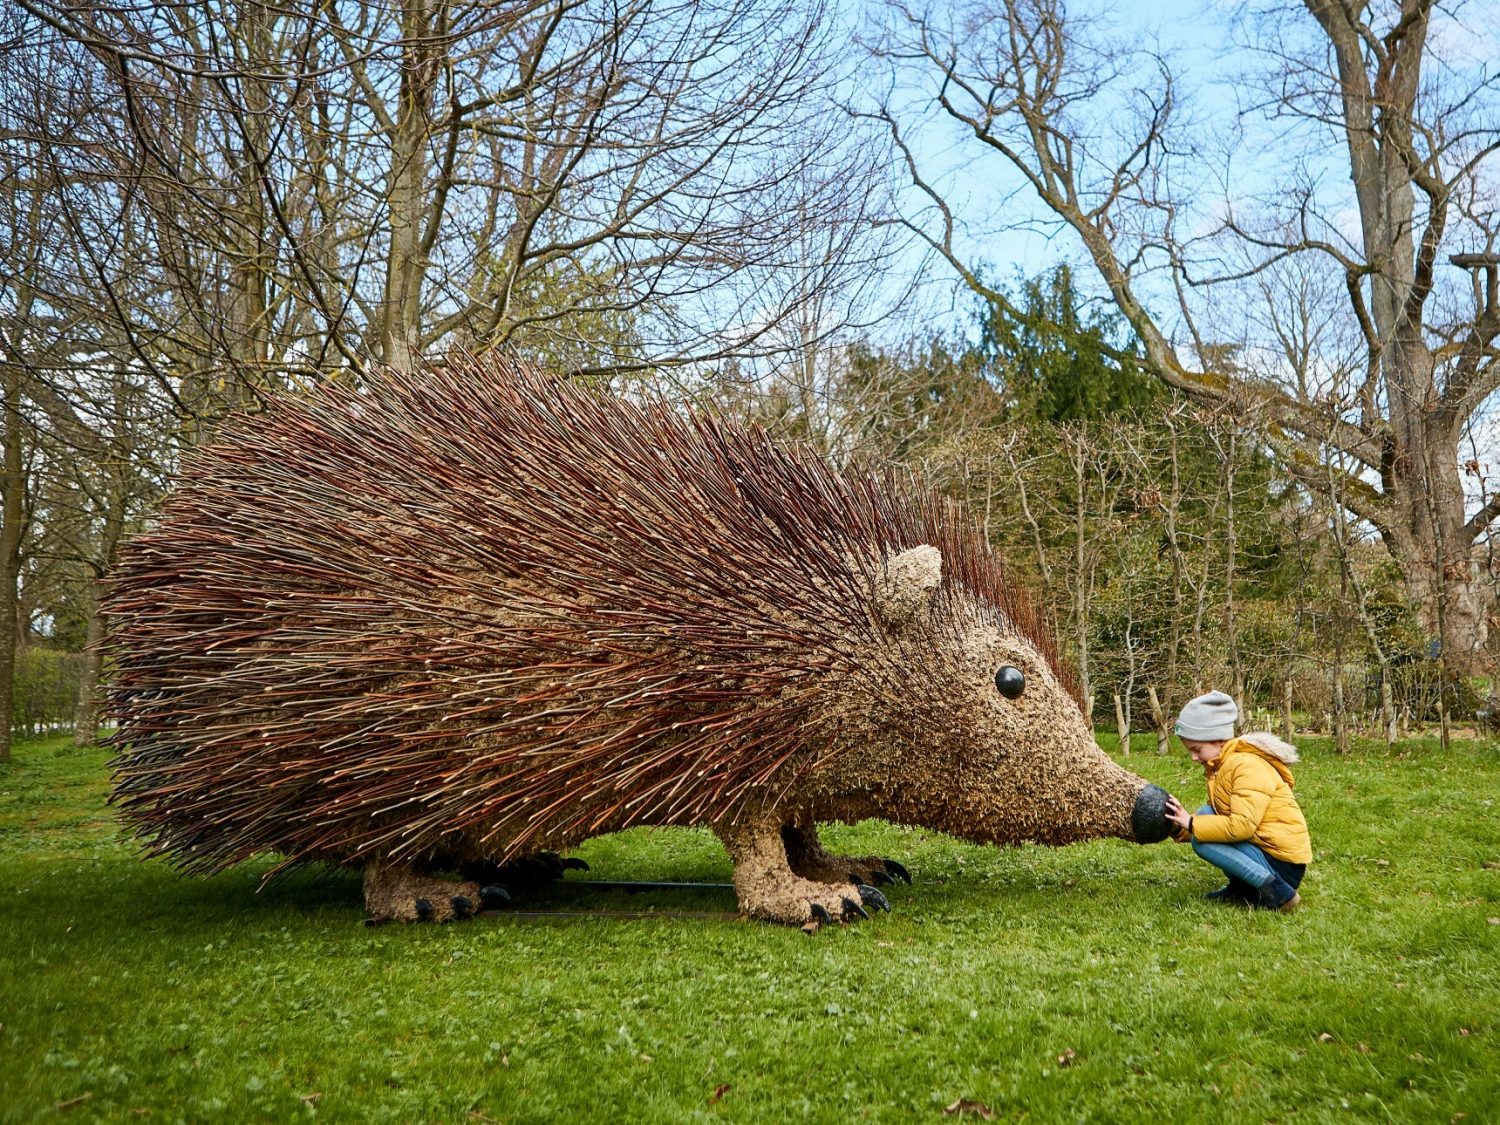 Giant six foot by three foot wooden hedgehog with child crouched in front